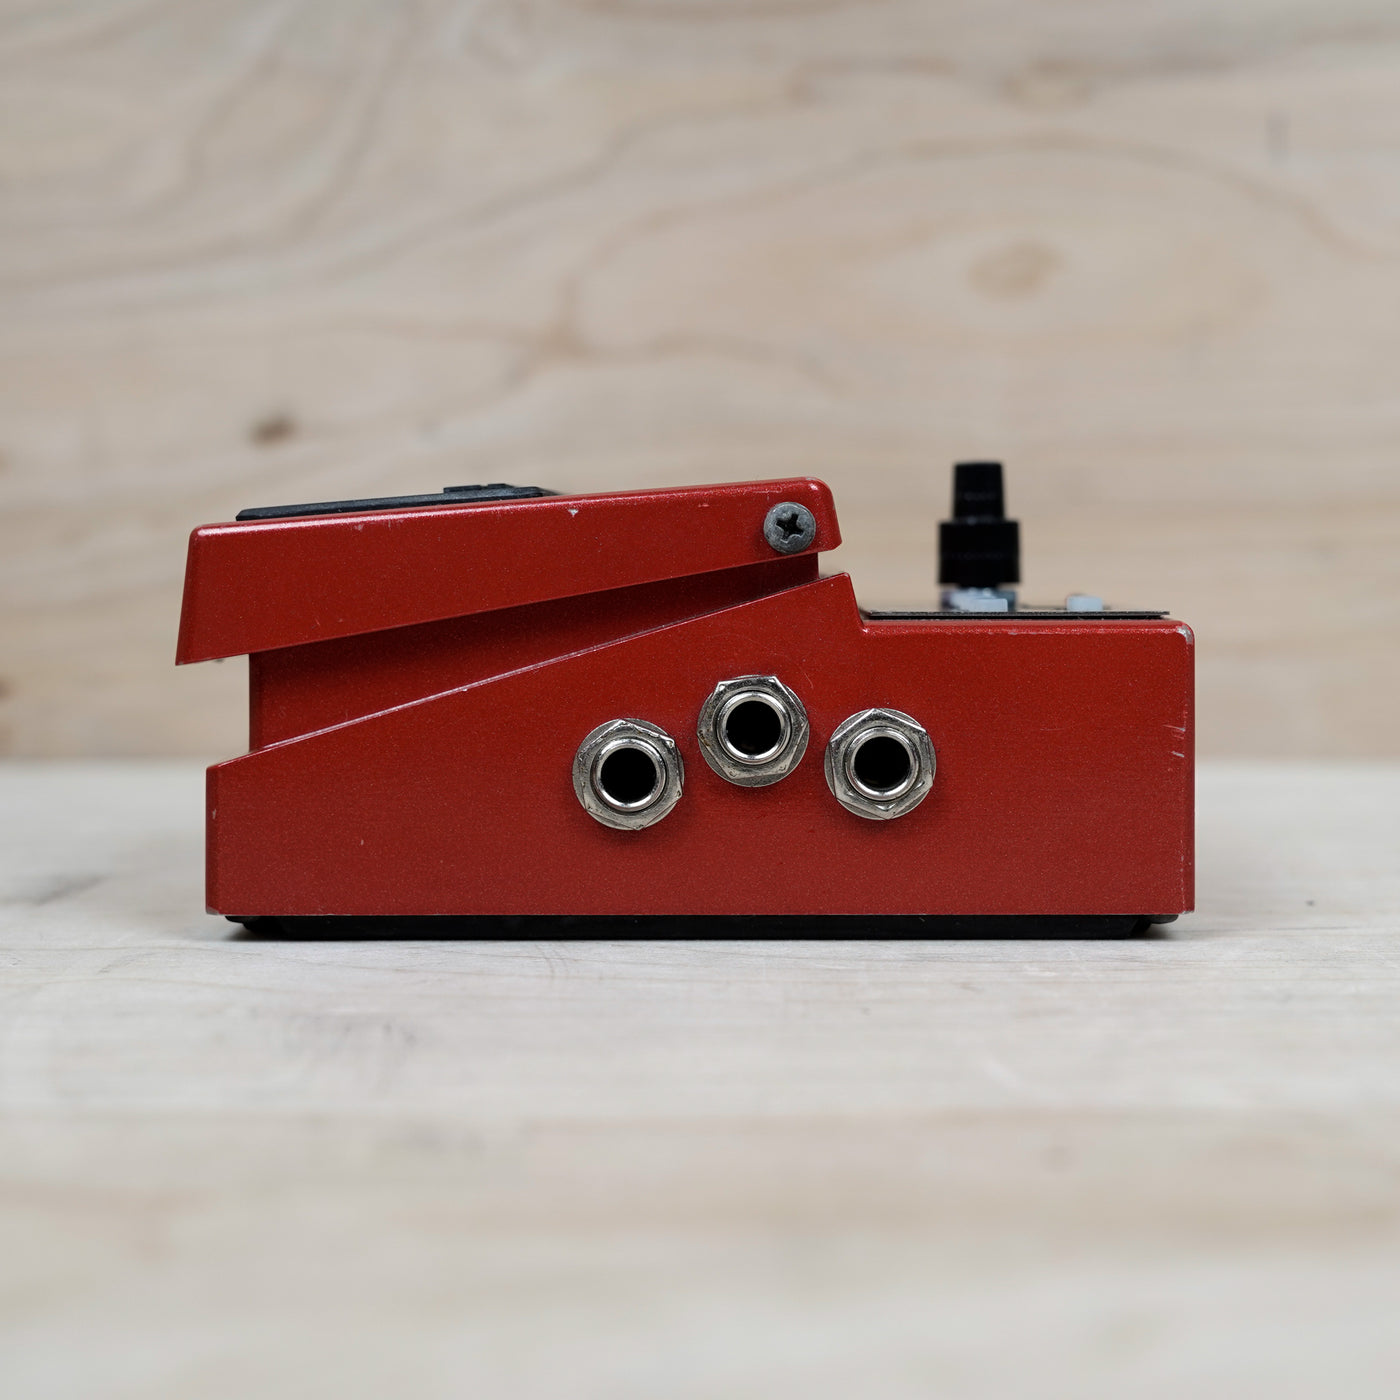 Boss Loop Station RC-3 (Red Label)